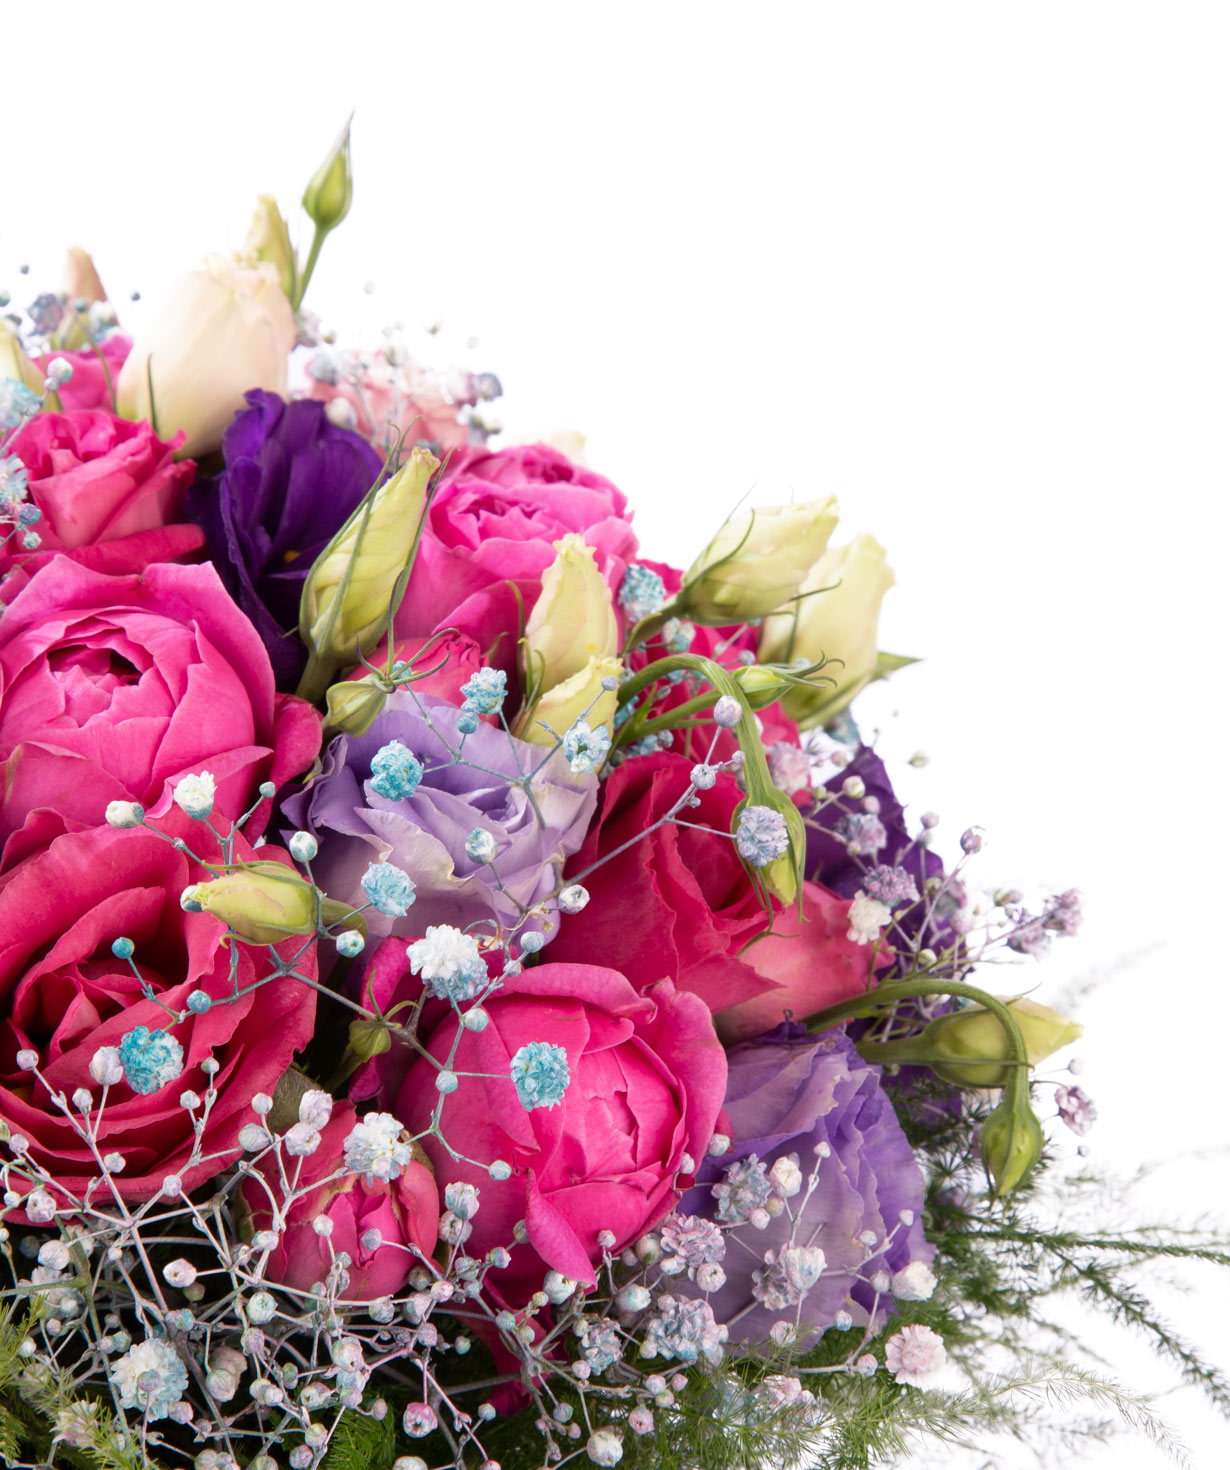 Composition `Poznan` with peony roses, gypsophilias and lisianthus